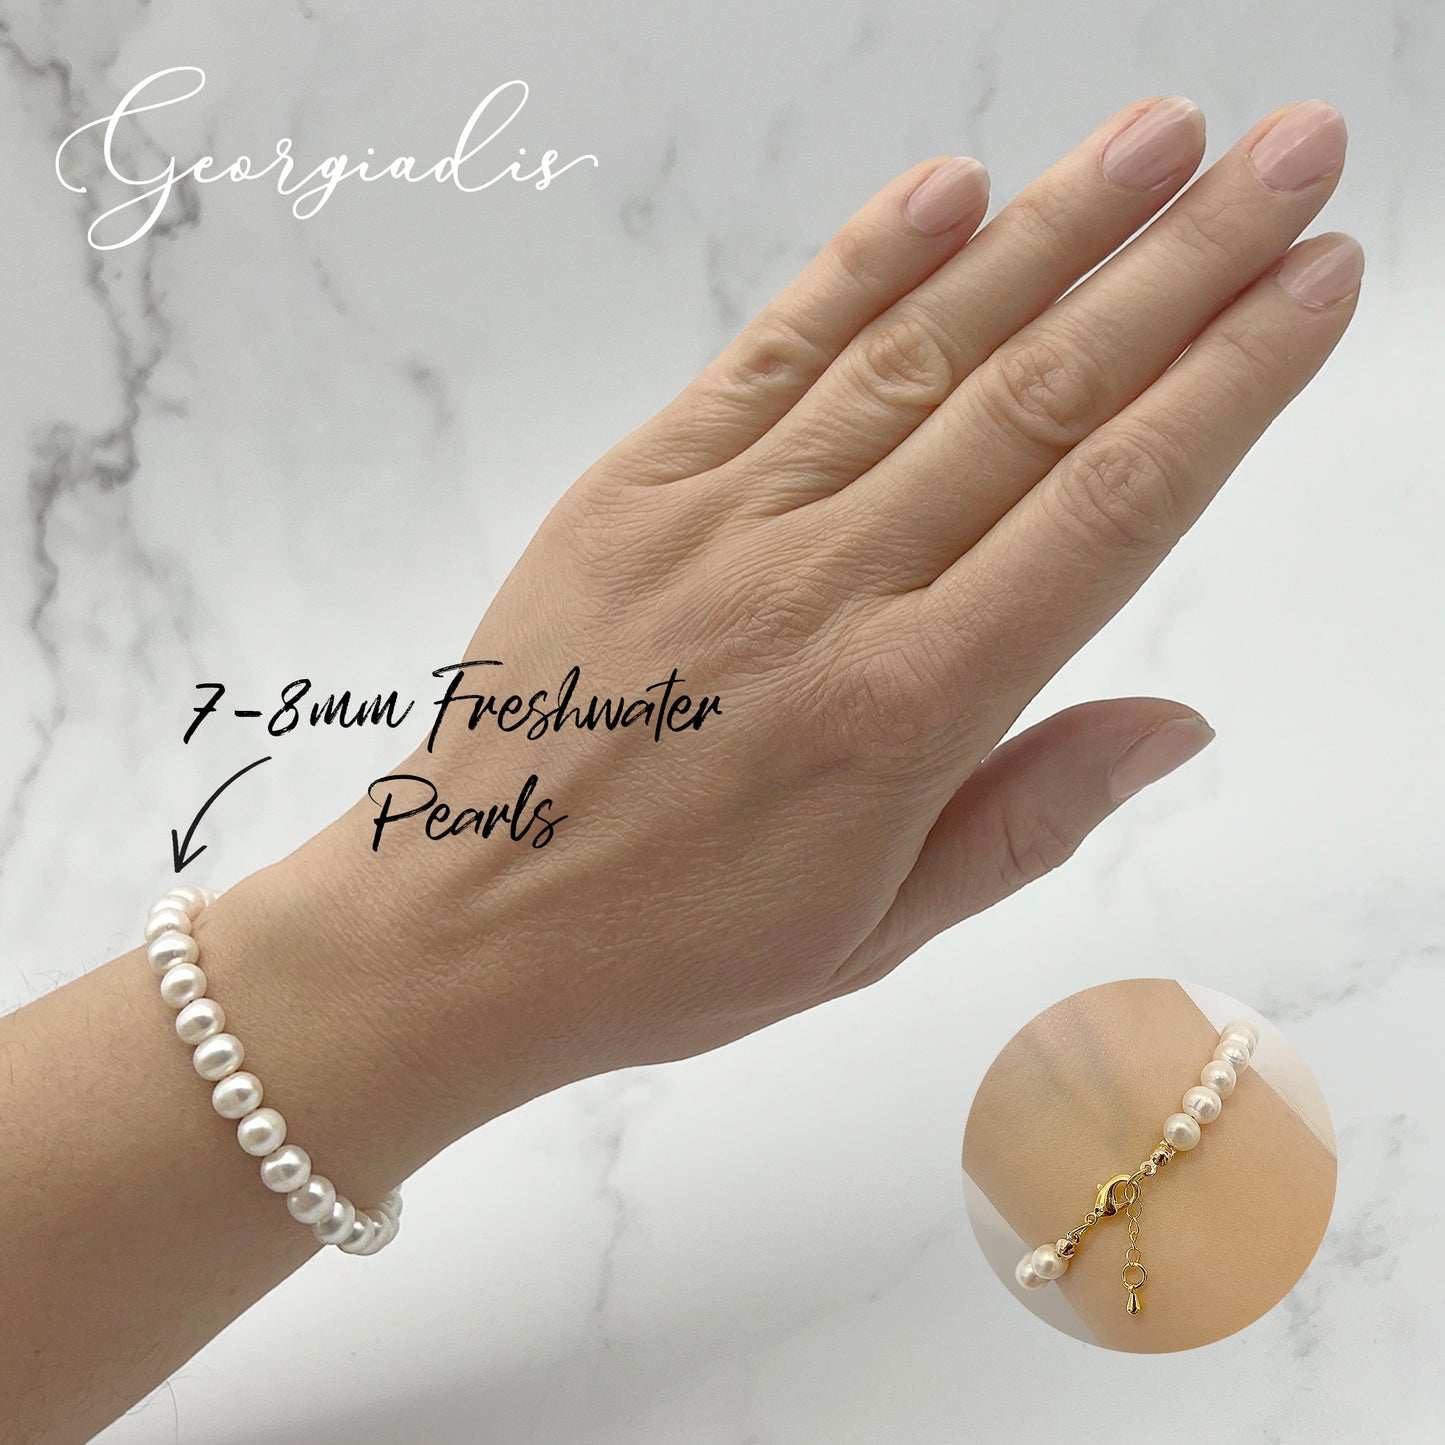 Beautiful Genuine Grade A 7-8mm White Freshwater High Luster Pearls, 18k Gold Plated Lobster Clasp, Clarity, Protection, Love, Intuition, Abundance.